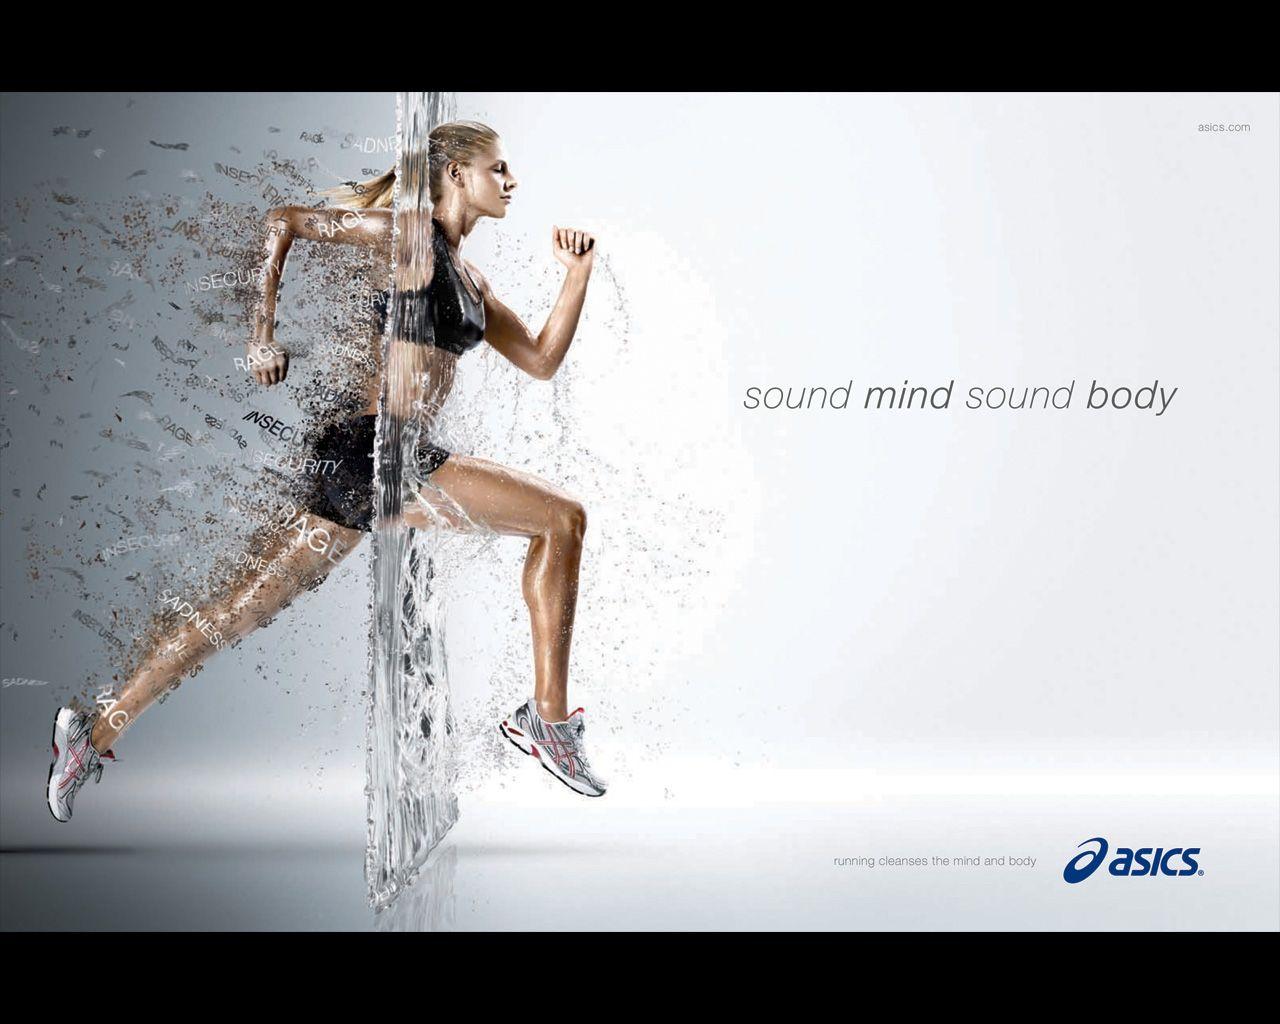 My mantra: Asics: Sound Mind Sound Body. This ad is part